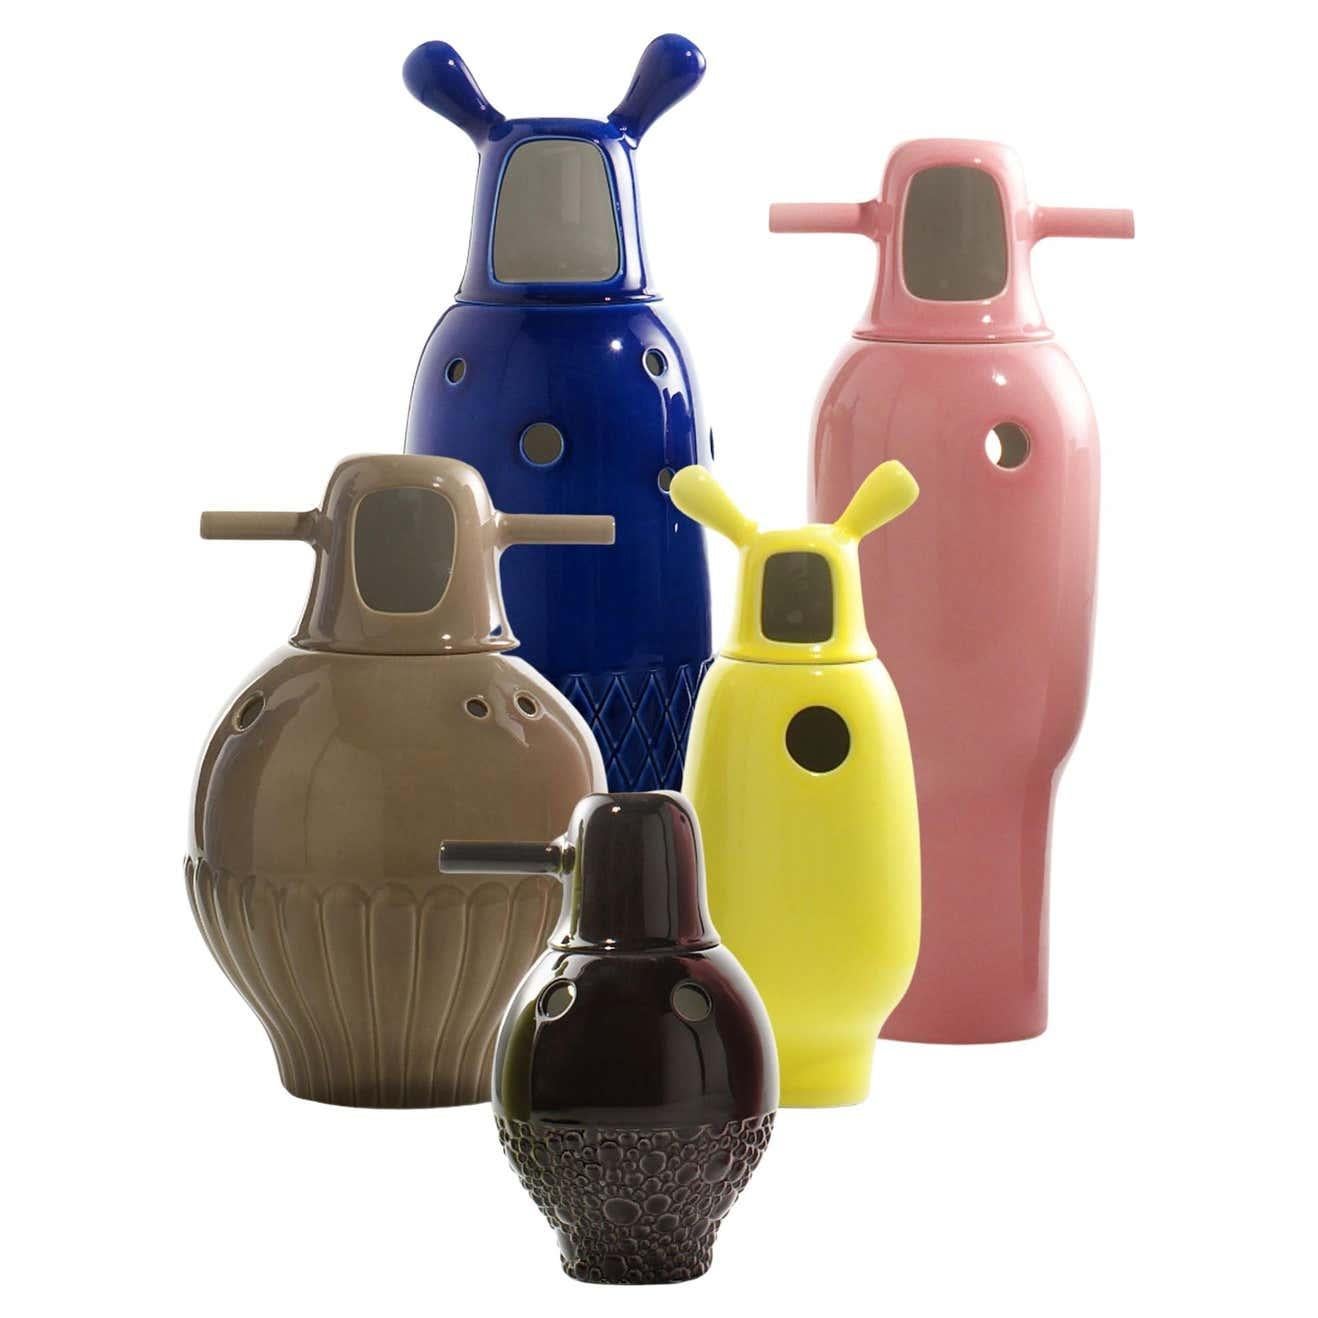 Set of 5 Contemporary Glazed Ceramic Showtime Vase Collection by Jaime Hayon